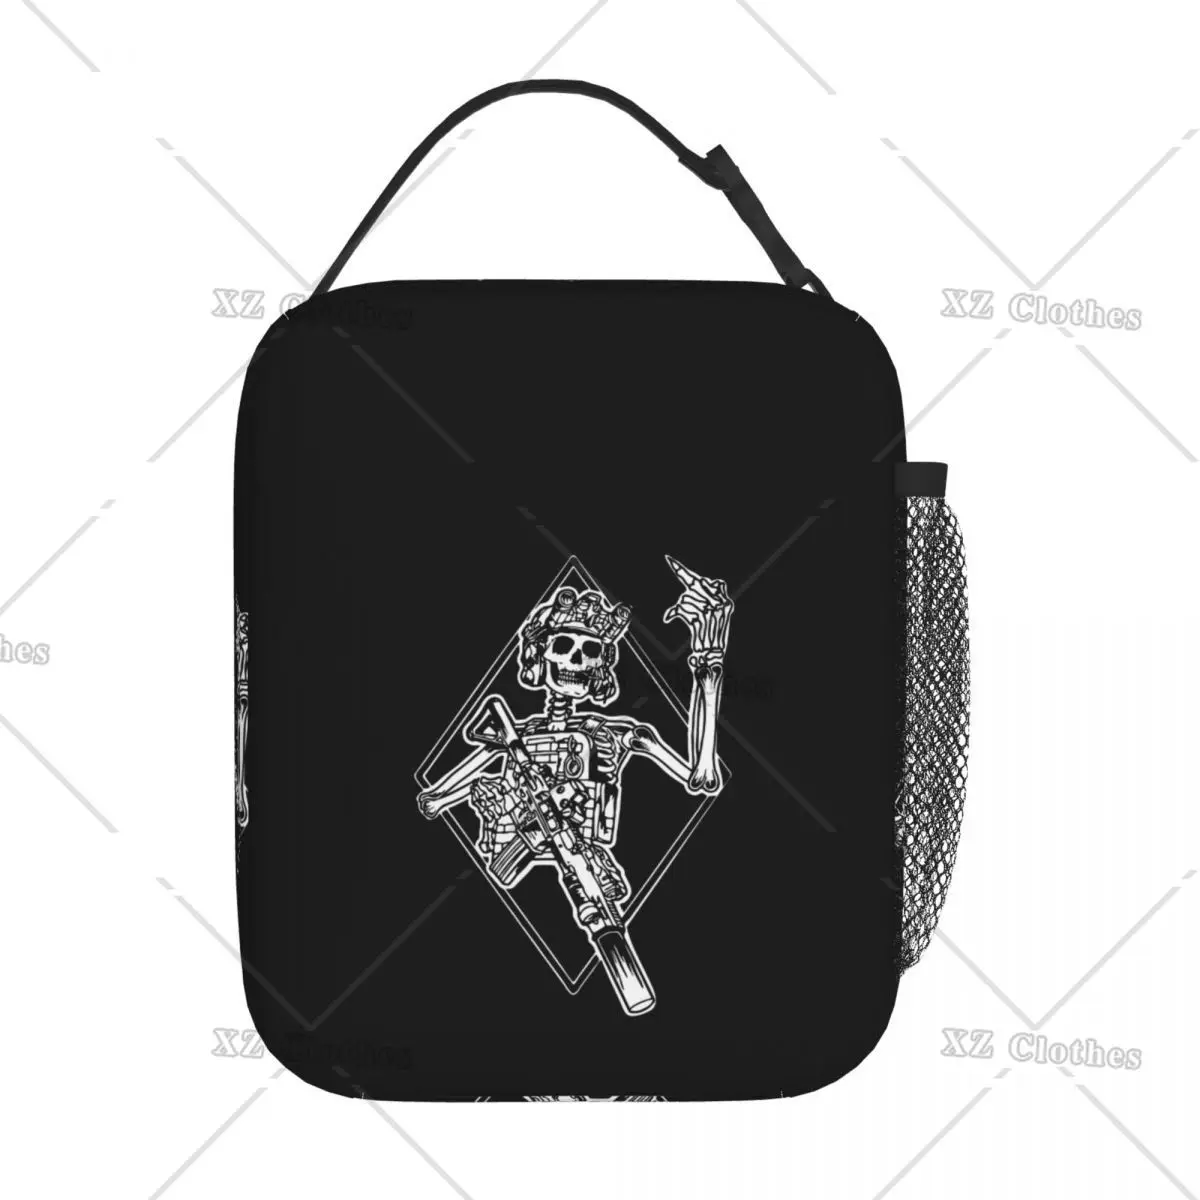 

Skull Skeleton with Gun Insulated Lunch Bag for Men Women Portable Cooler Thermal Lunch Box with Pocket Work Picnic Trip Office